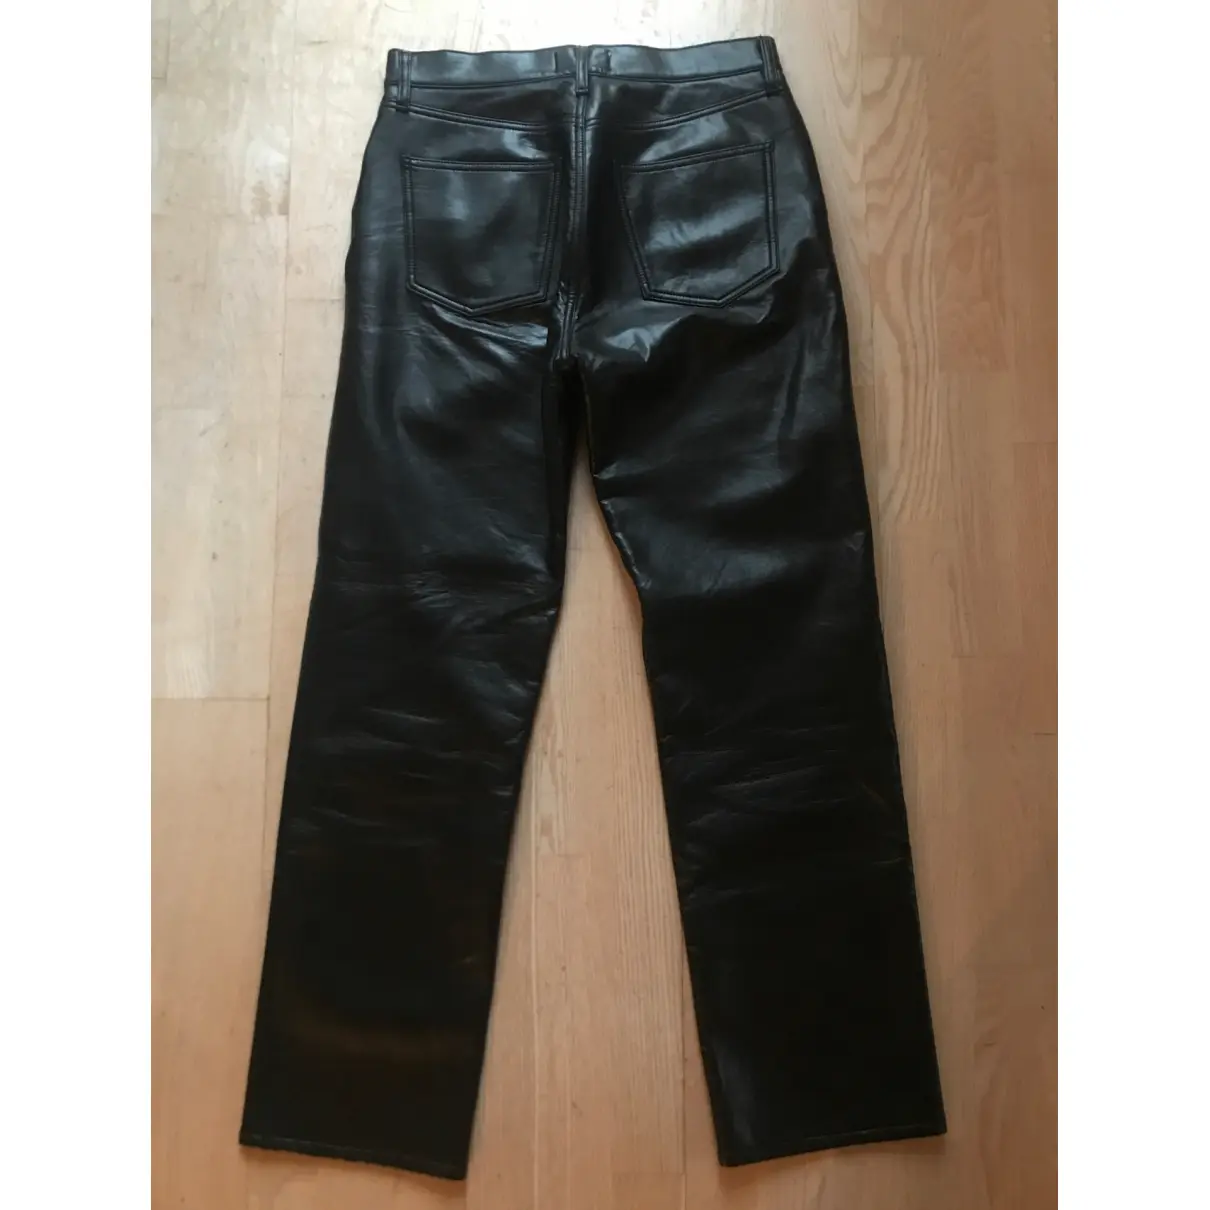 Buy Agolde Leather straight pants online